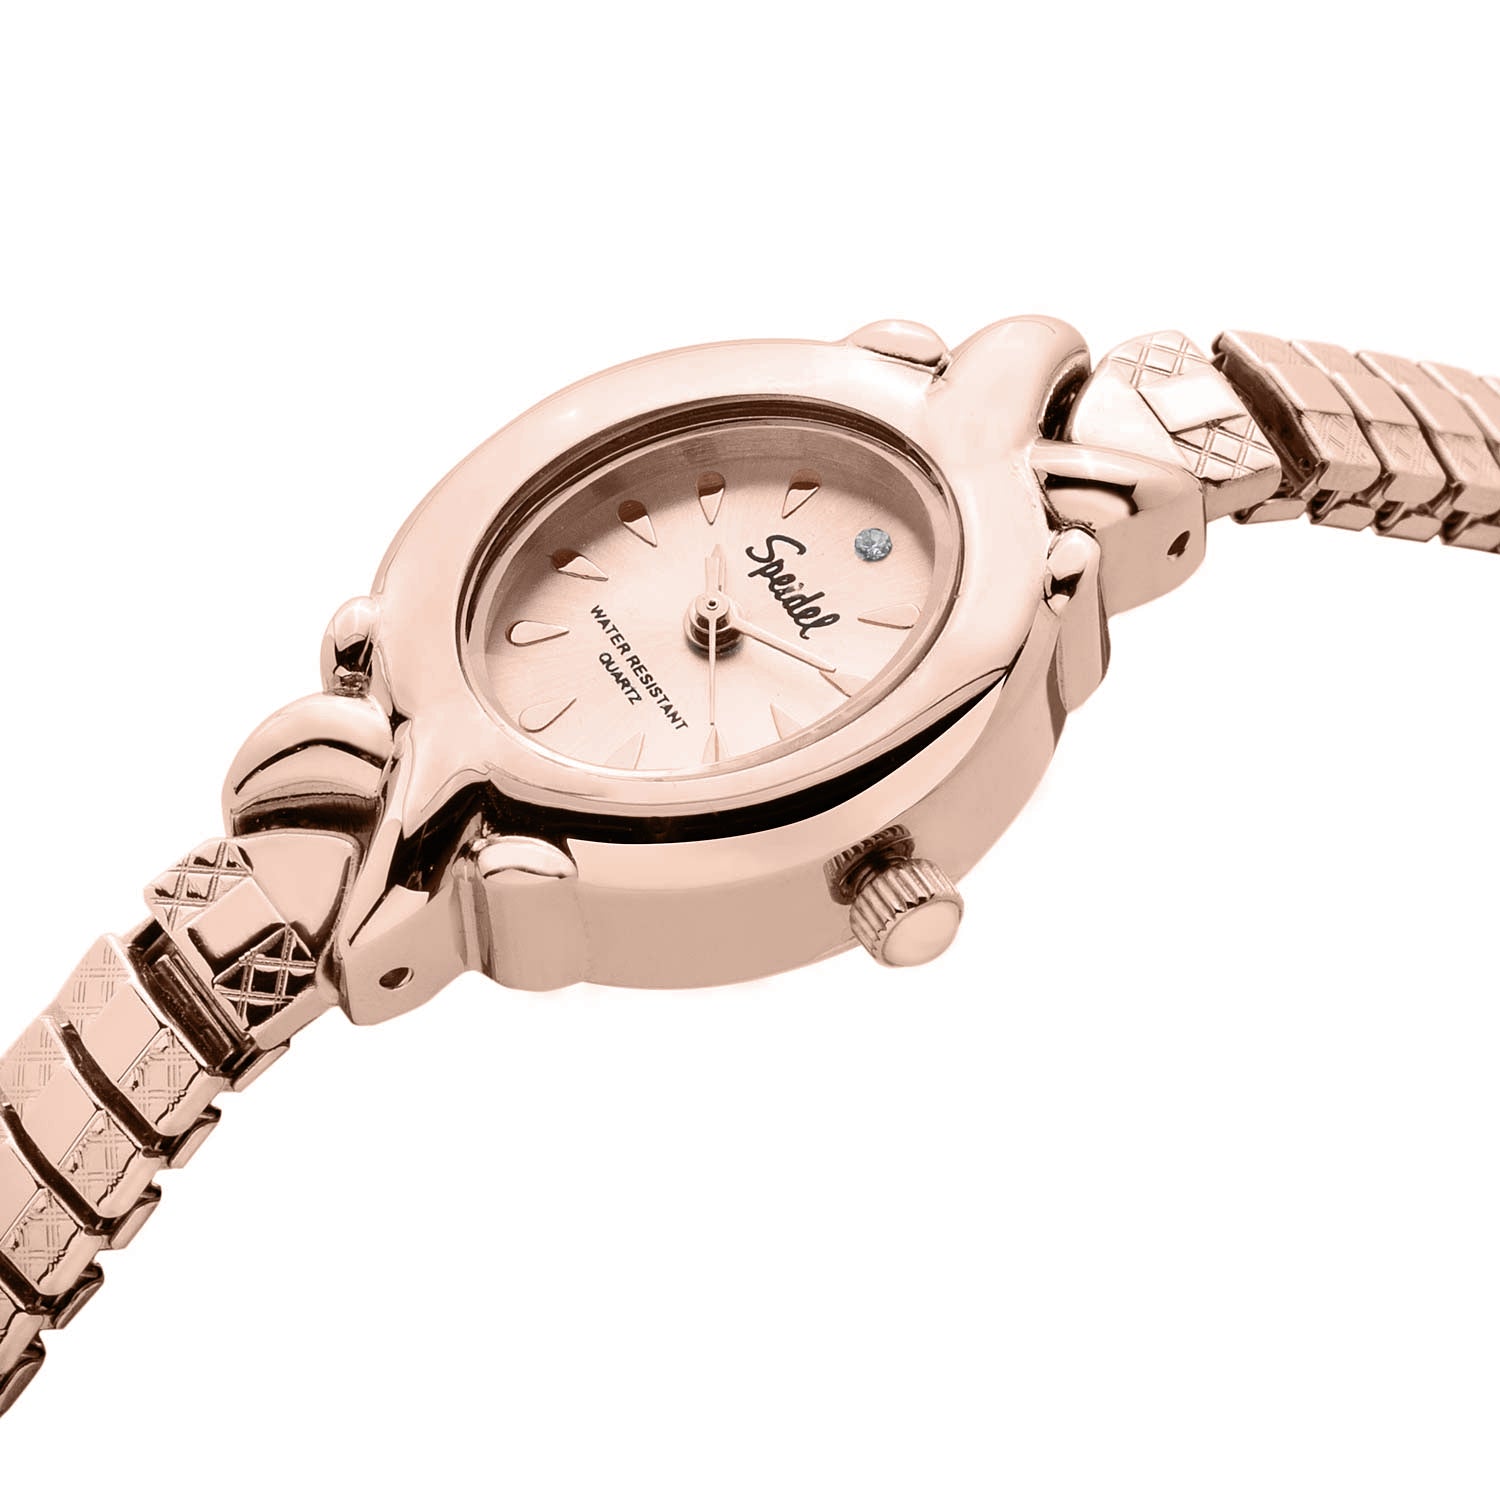 Women's C-Ring Twist-O-Flex Watch, Gold And Silver Tone Expansion